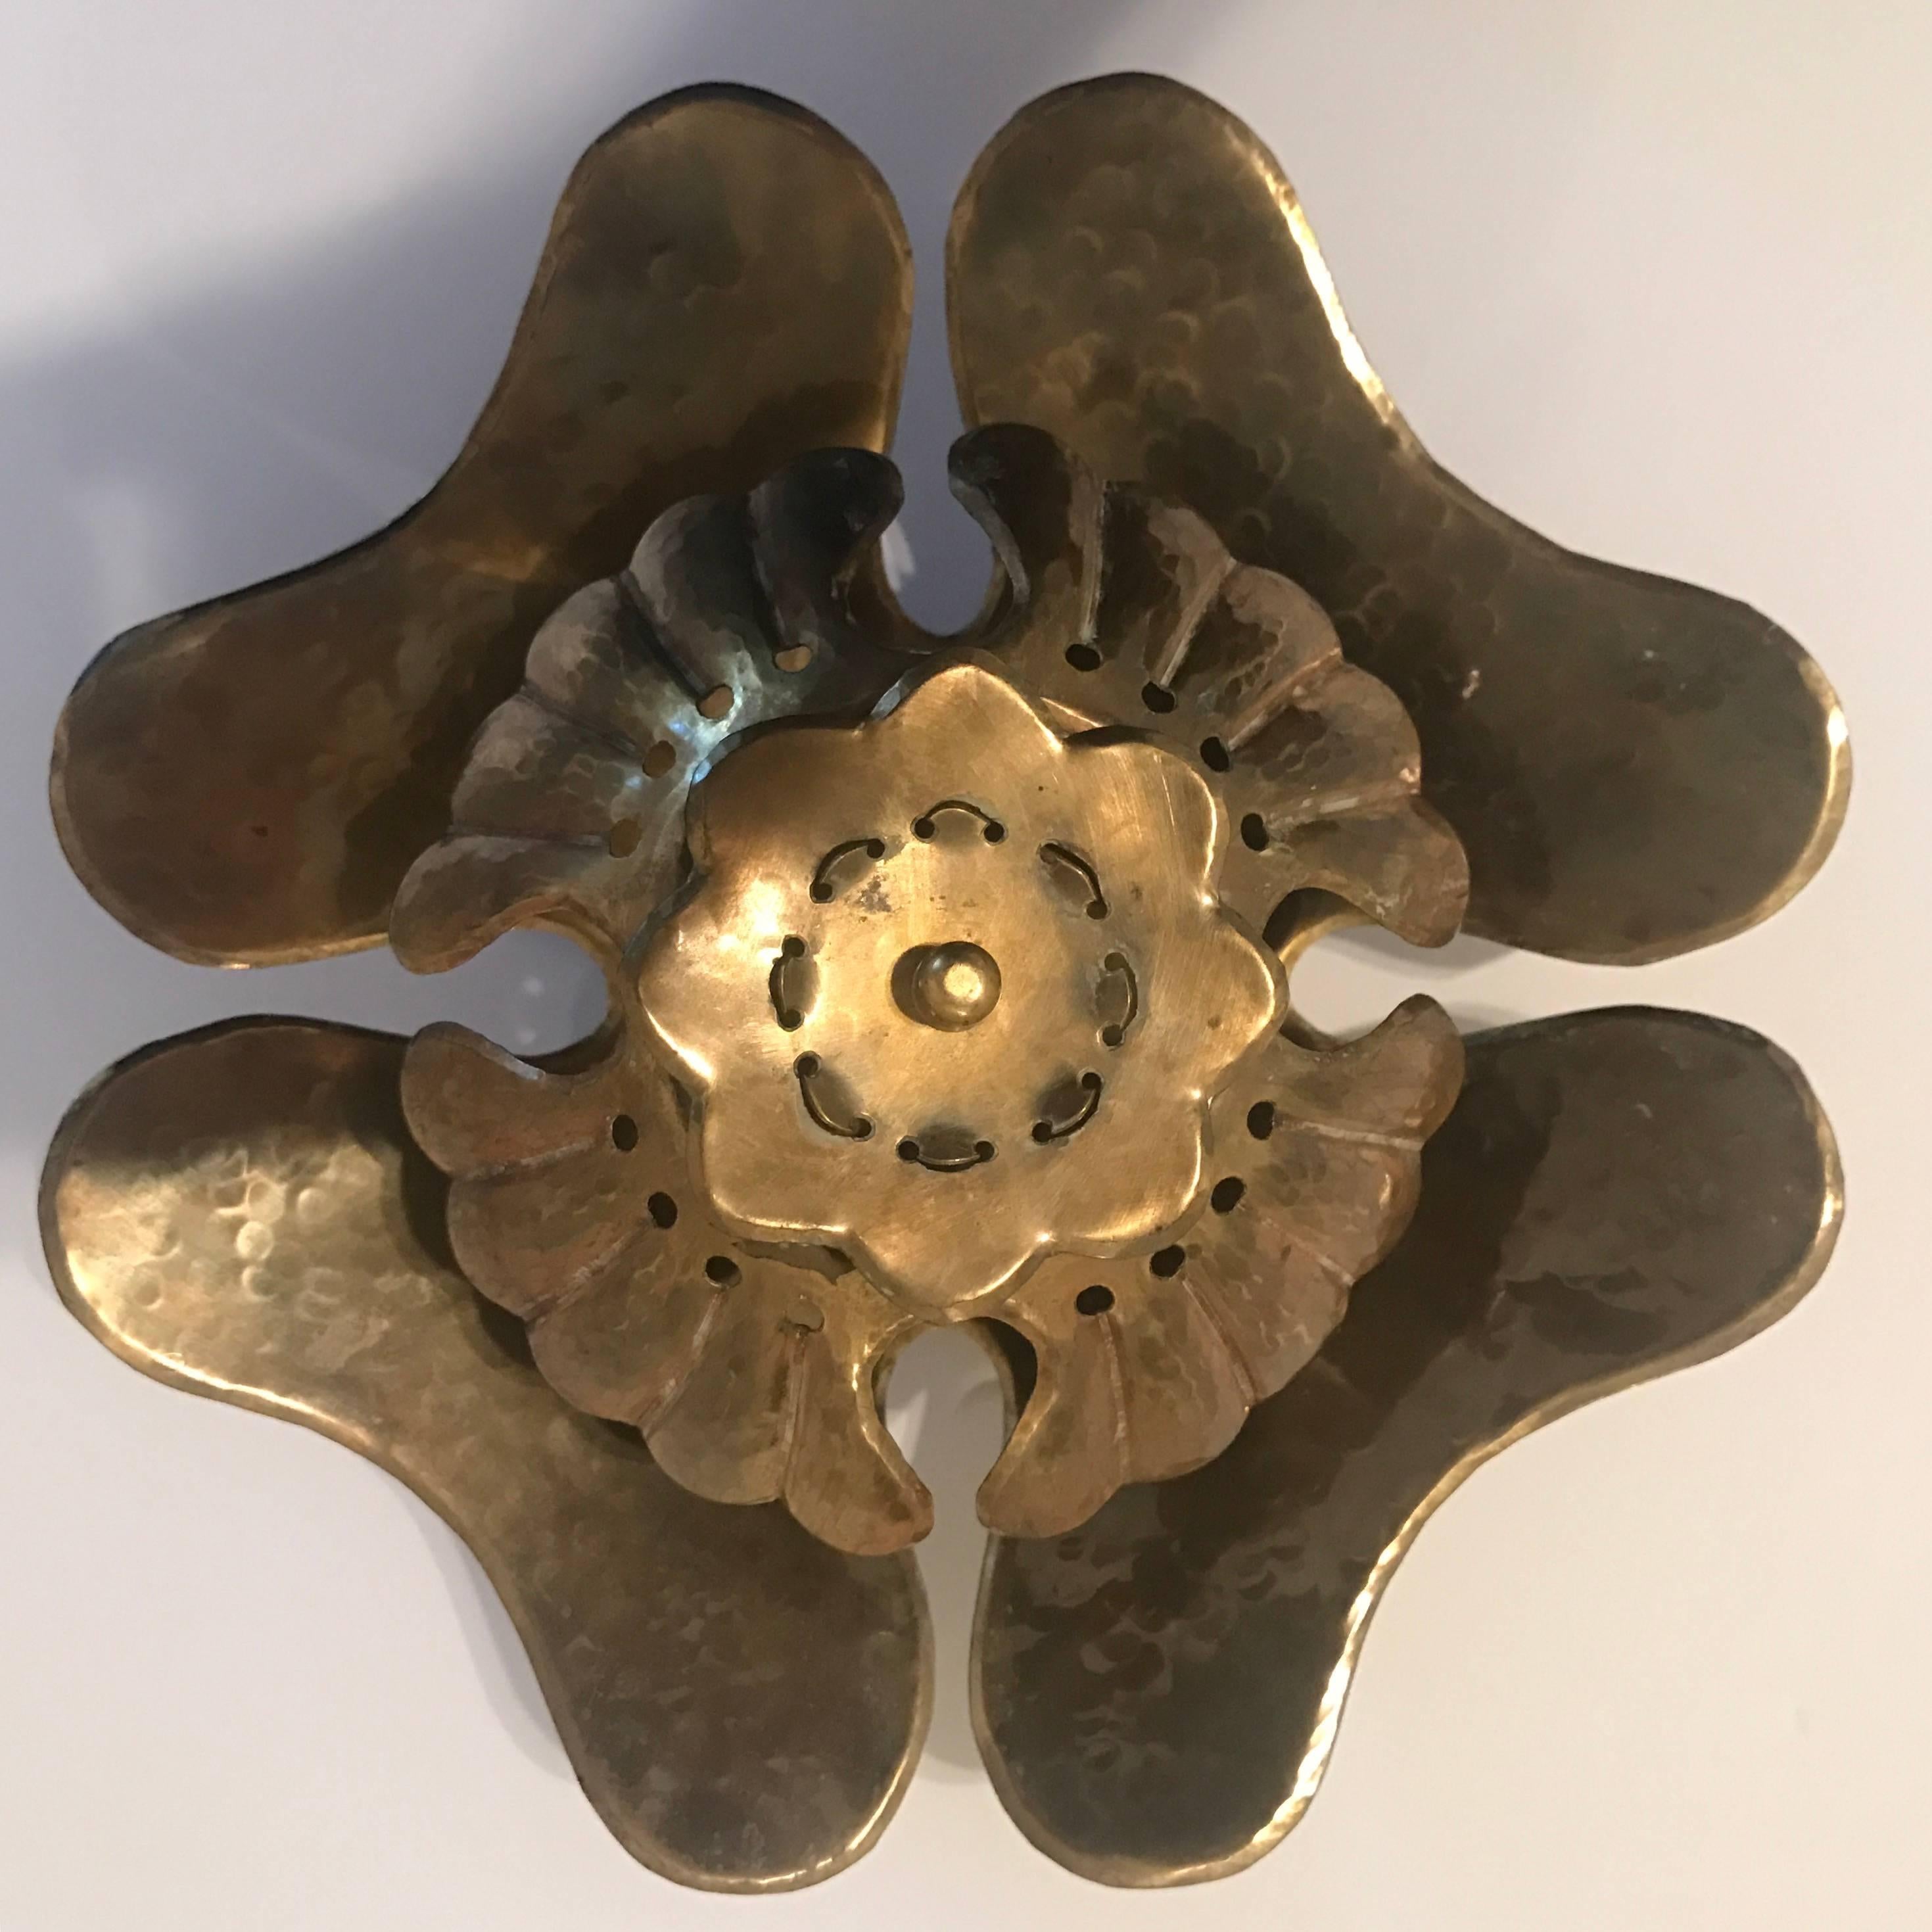 An original 1940 Swedish hand tooled floral brass wall light designed by Lars Holmstrom for Arvika. Newly Rewired . One 60 watt candelabra socket. Signed . Original patina. 6" deep from the wall.

Biography:
Lars Holmstrom was a Swedish